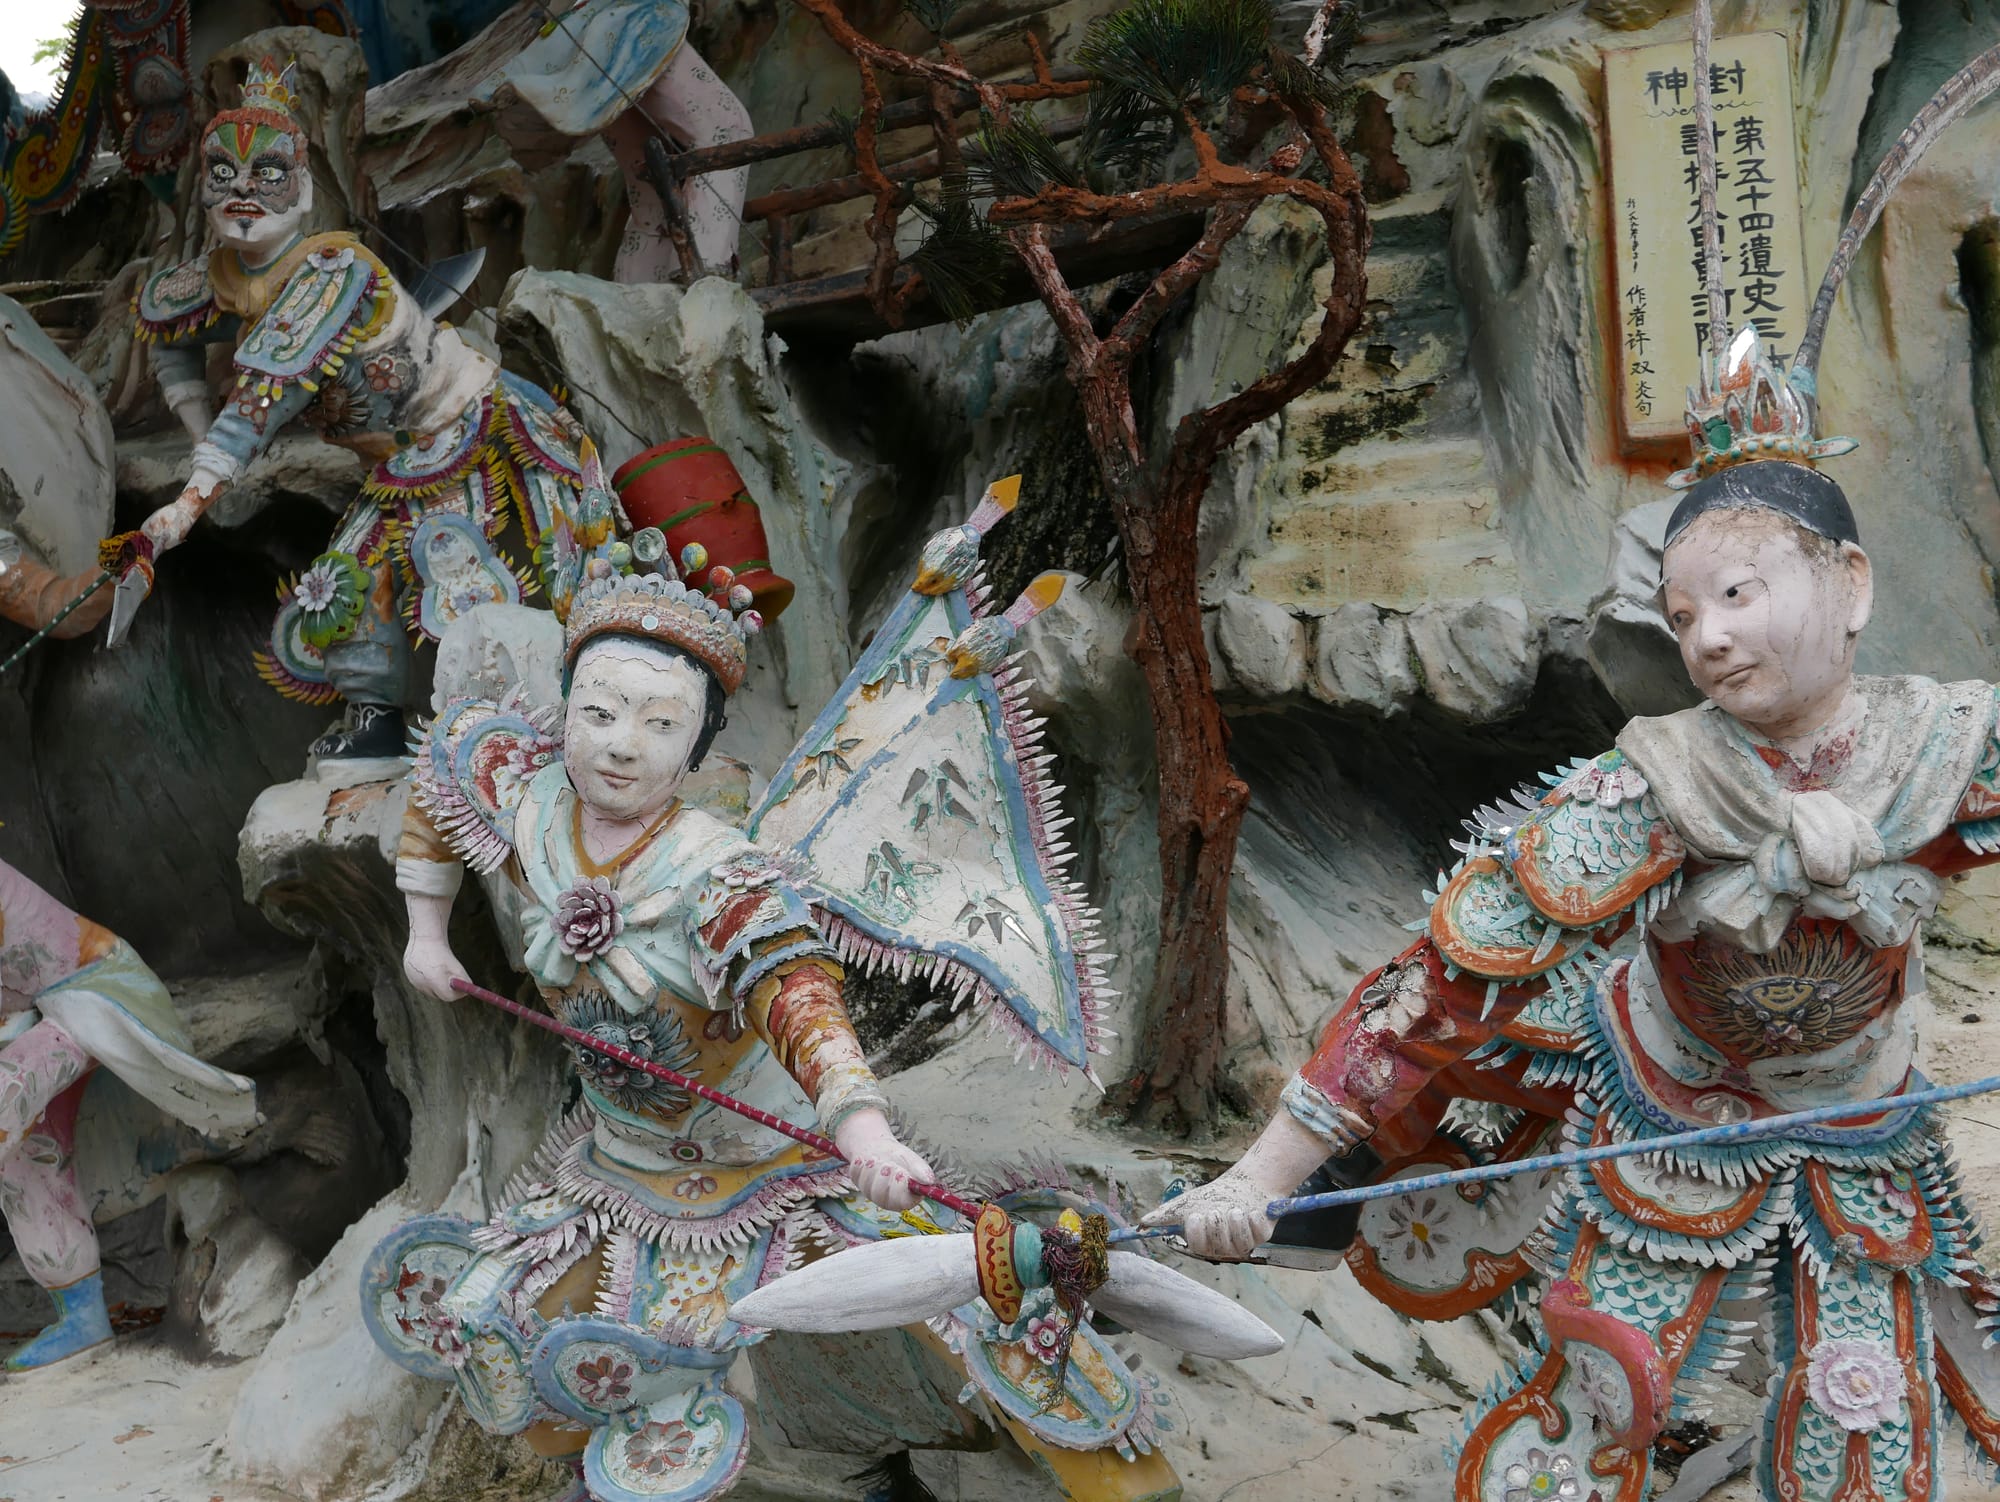 Photo by Author — a display with a stunning level of detail — Haw Par Villa, Singapore